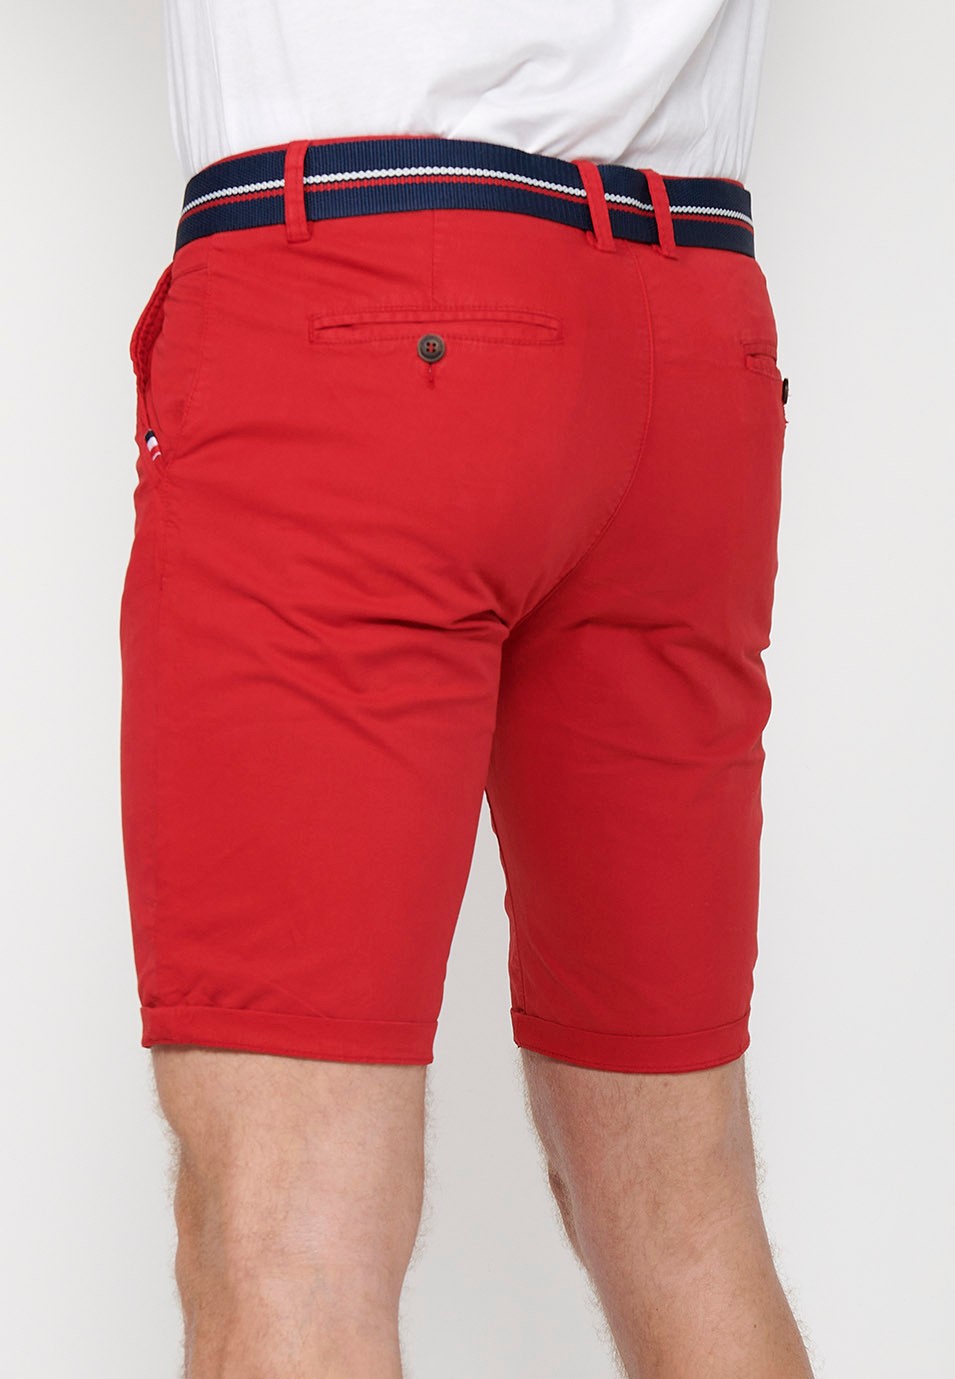 Shorts with cuffed finish with front closure with zipper and button and belt in Red for Men 6